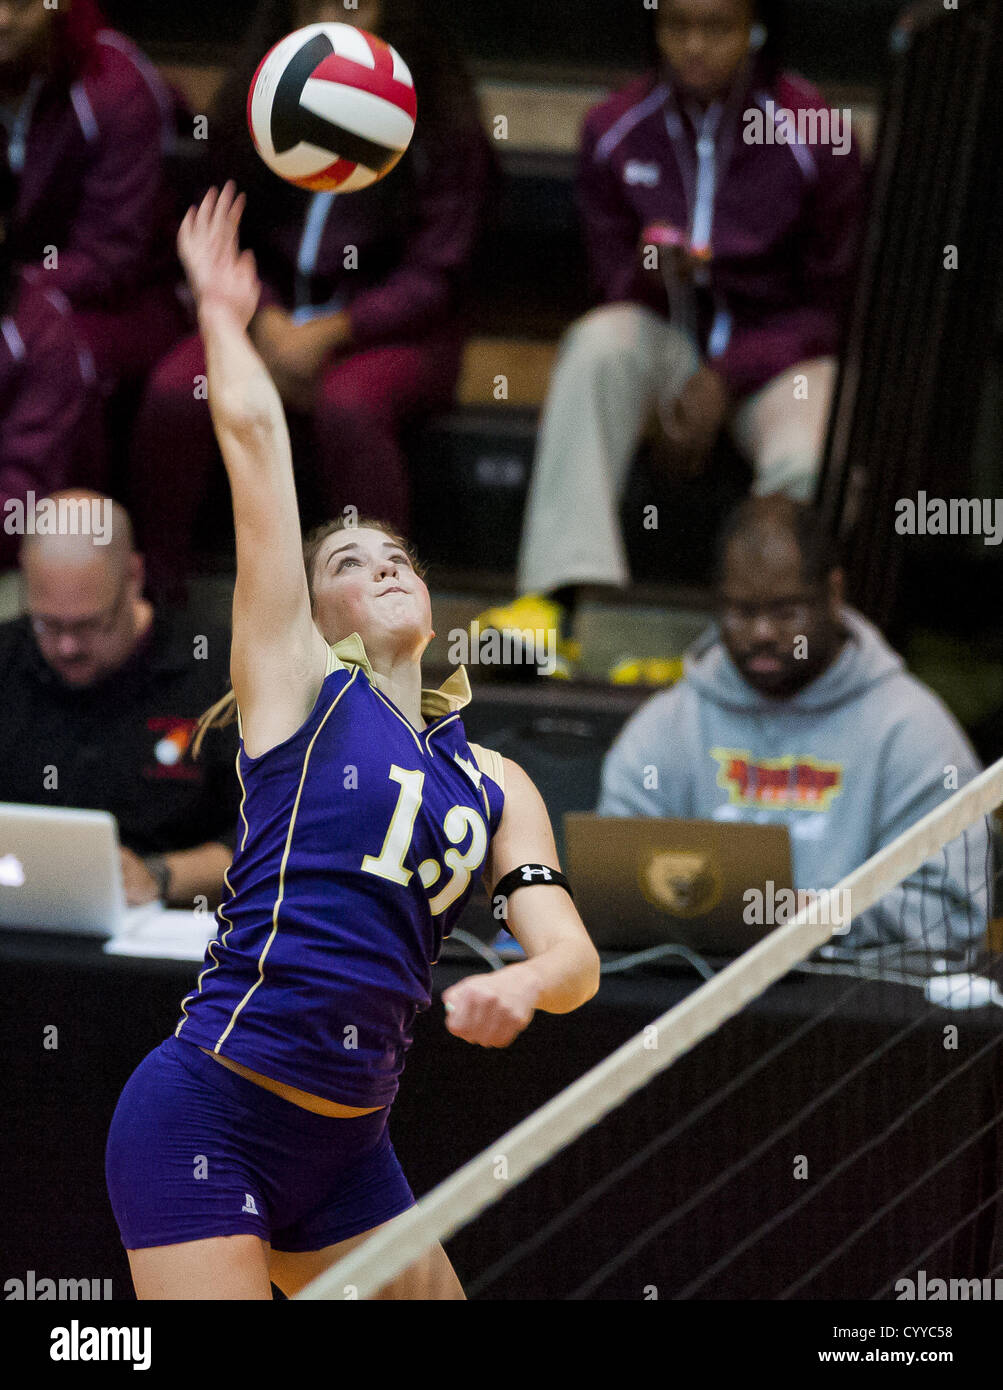 Nov. 12, 2012 - College Park, Maryland, U.S. - Smithsburg's Amanda Snowden hits the ball during the Sparrows Point High School versus Smithsburg High School match in the Semifinals of the Maryland State Volleyball 1A Championship at Ritchie Coliseum in College Park, Maryland on November 12, 2012. Smithsburg defeated Sparrows Point in straight sets 25-10, 25-12, 25-10 to advance to the State Finals. (Credit Image: © Scott Serio/Eclipse/ZUMAPRESS.com) Stock Photo